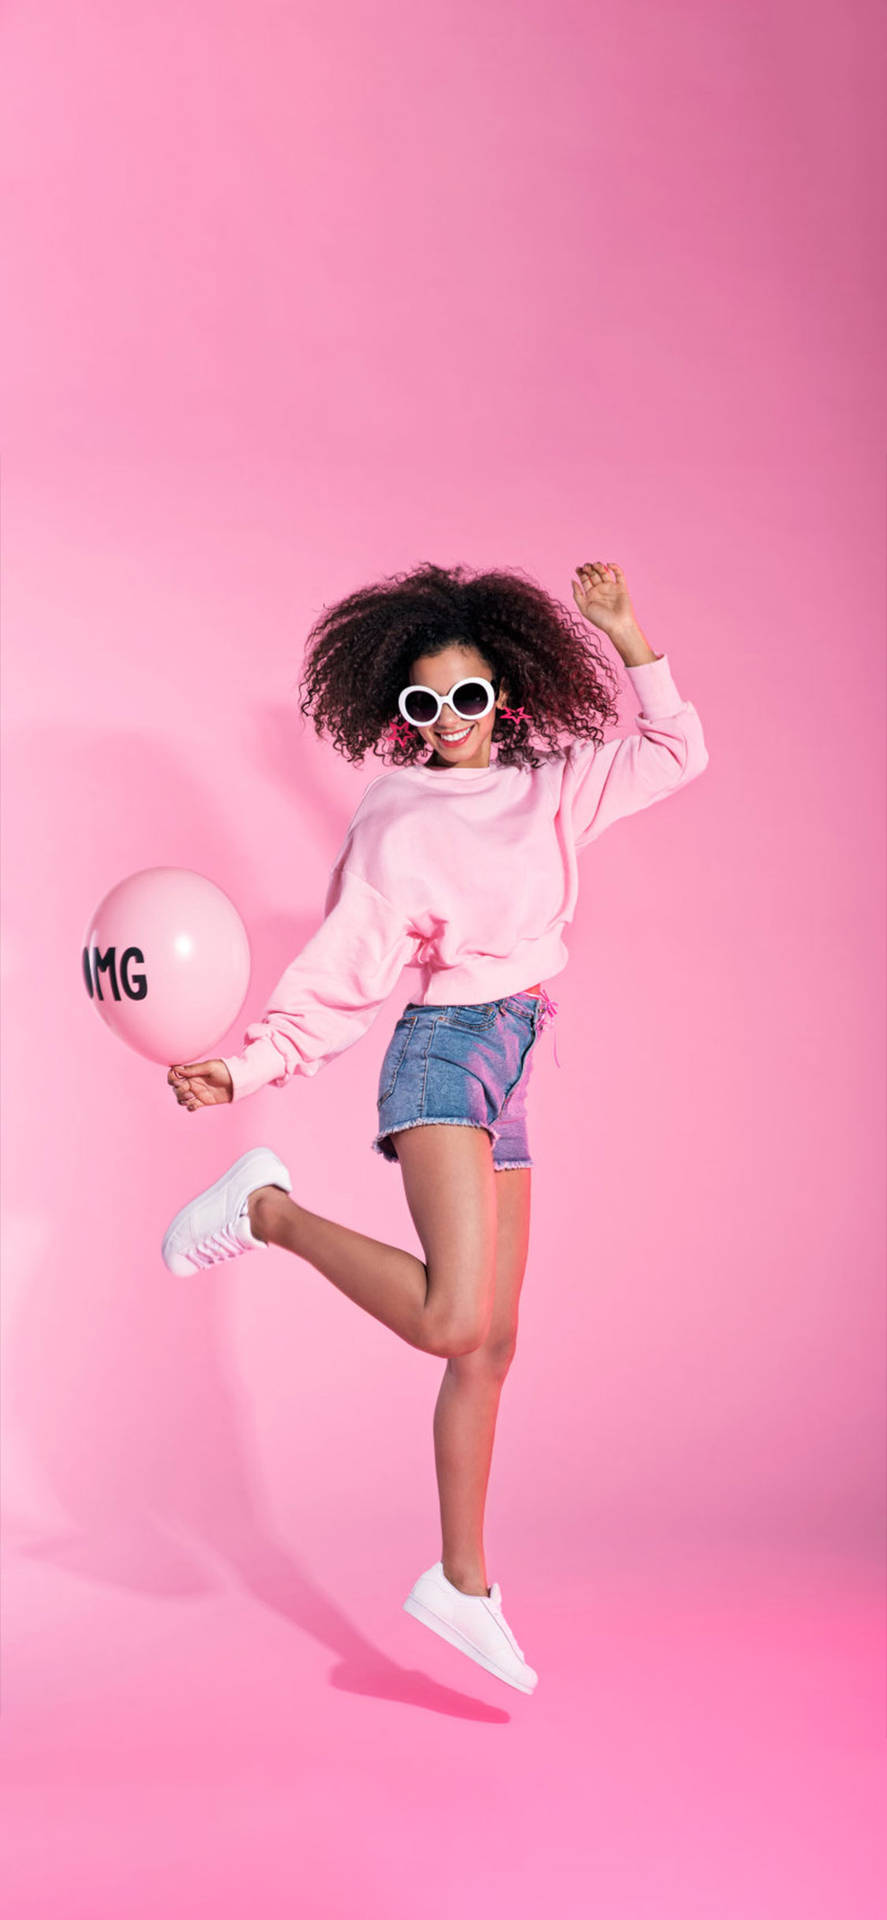 Cool Girl Jumping In Pink Wallpaper